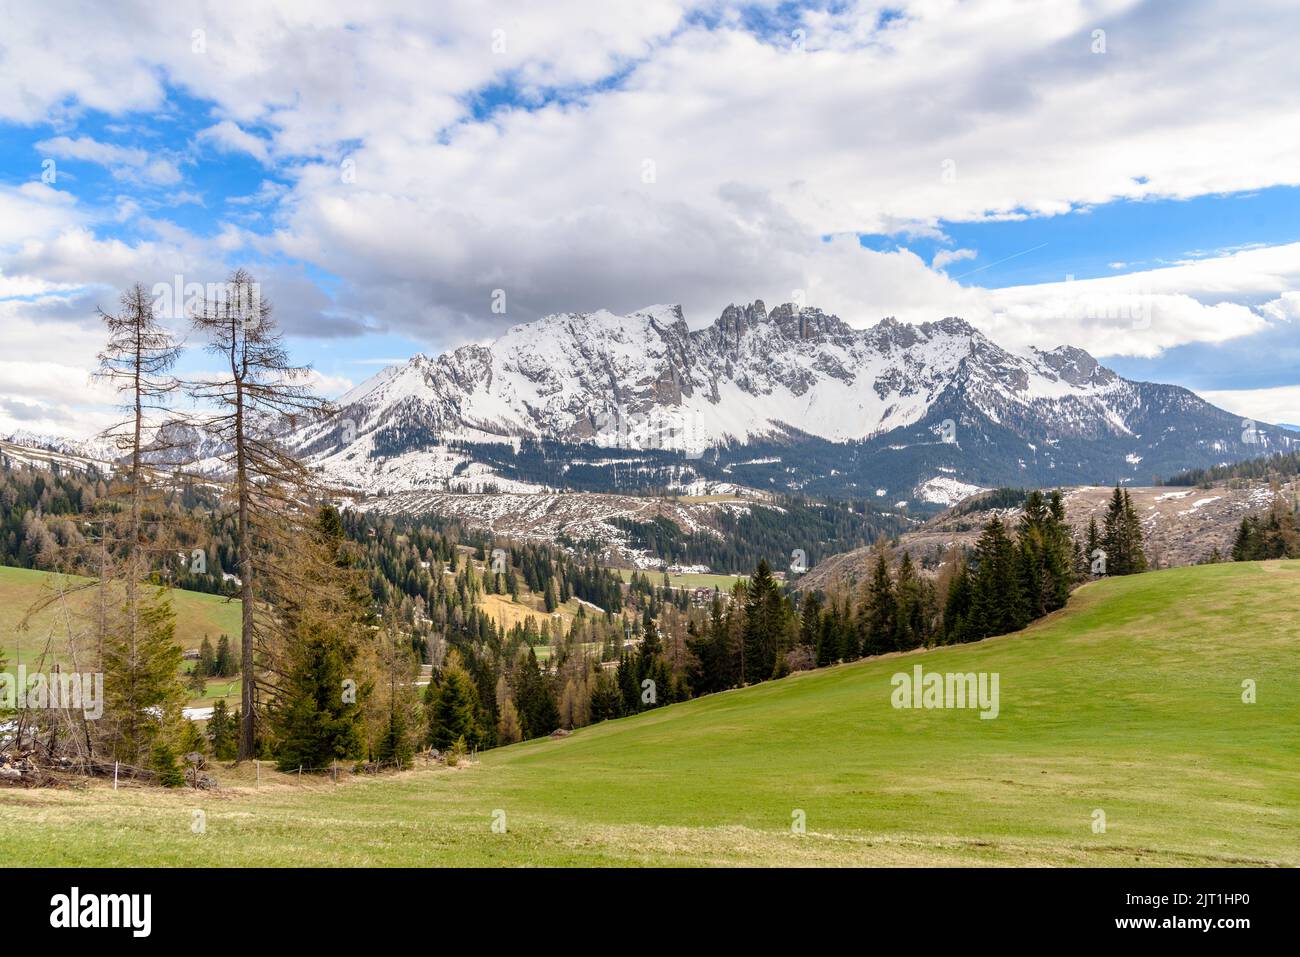 Majestic snow-capped mountain in the European Alps on a loudy spring day. a Medow is in foreground. Stock Photo